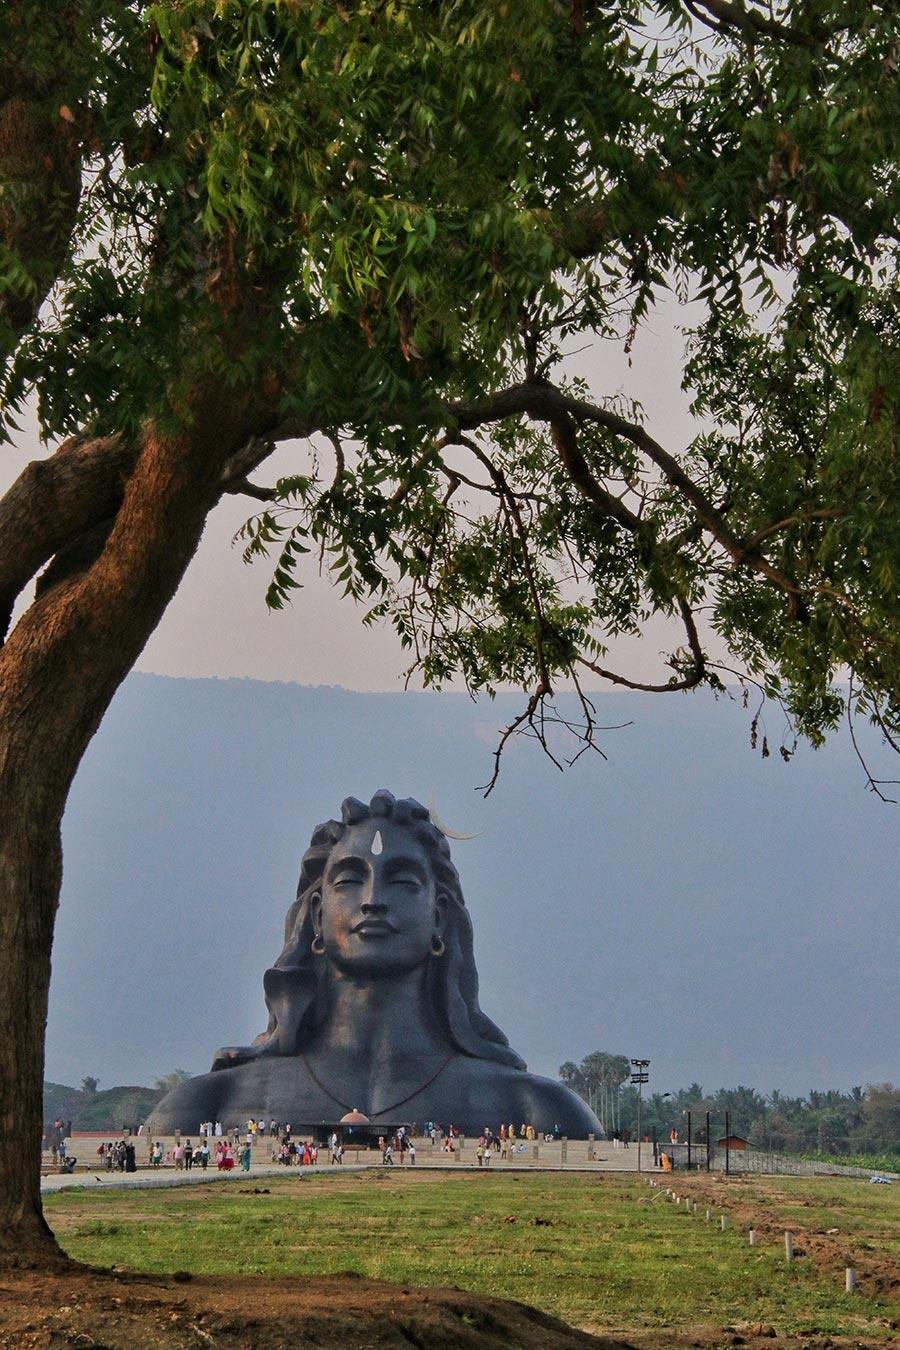 Real Photos Of Lord Shiva